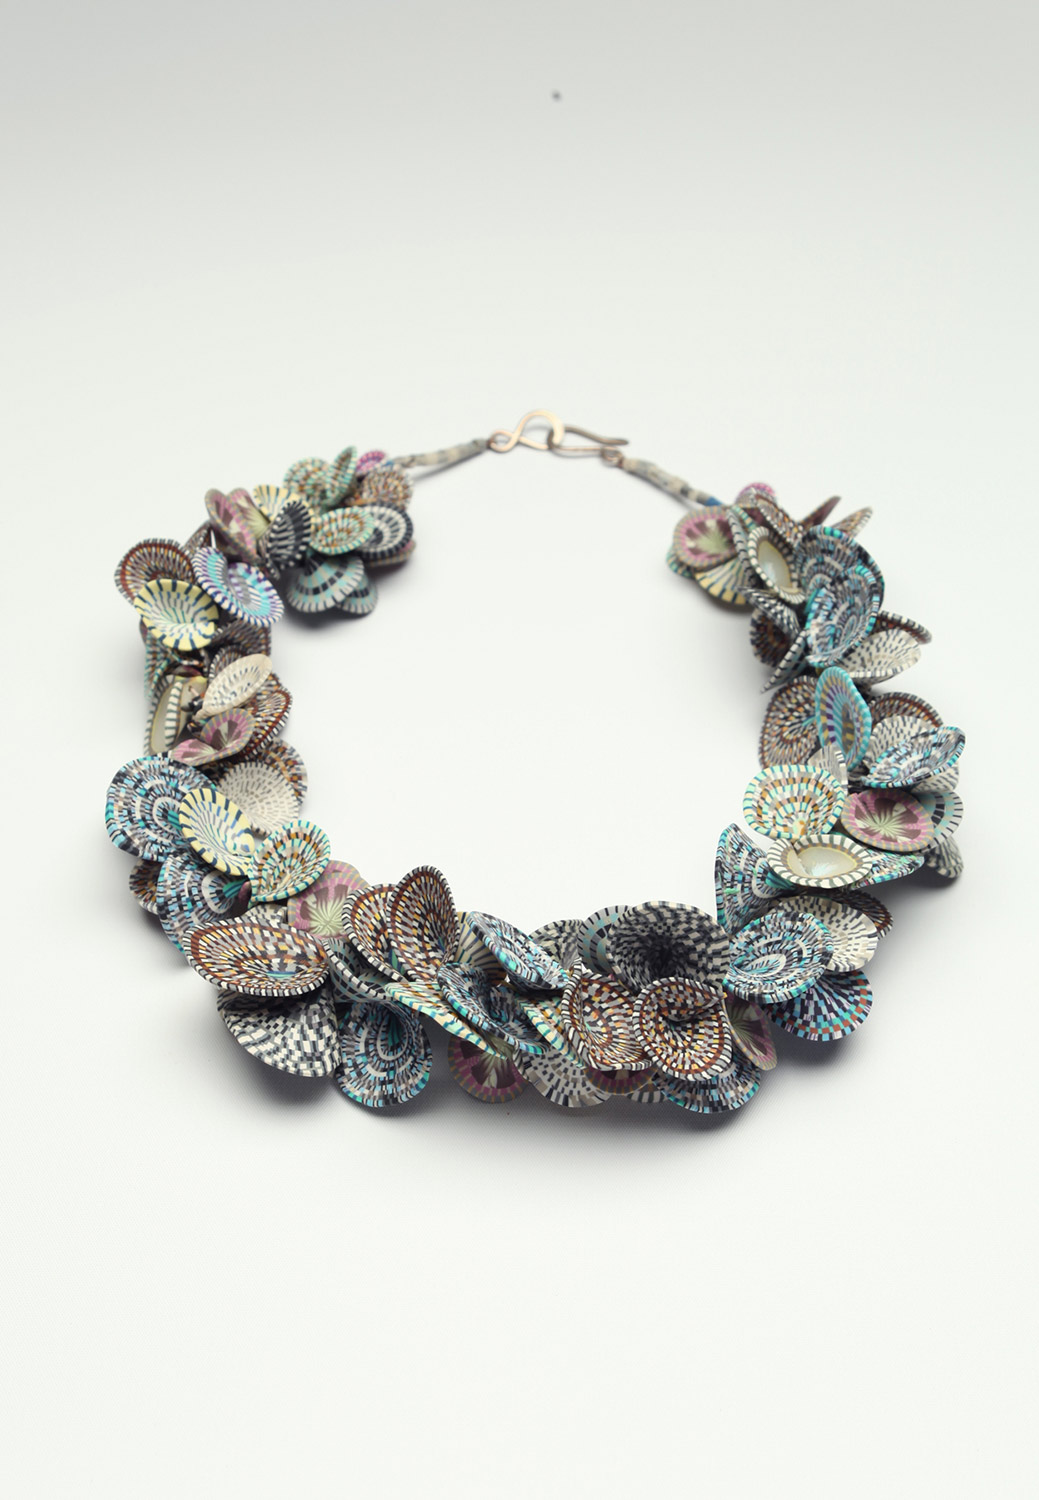 Necklace with multicolored overlapping polymer shells